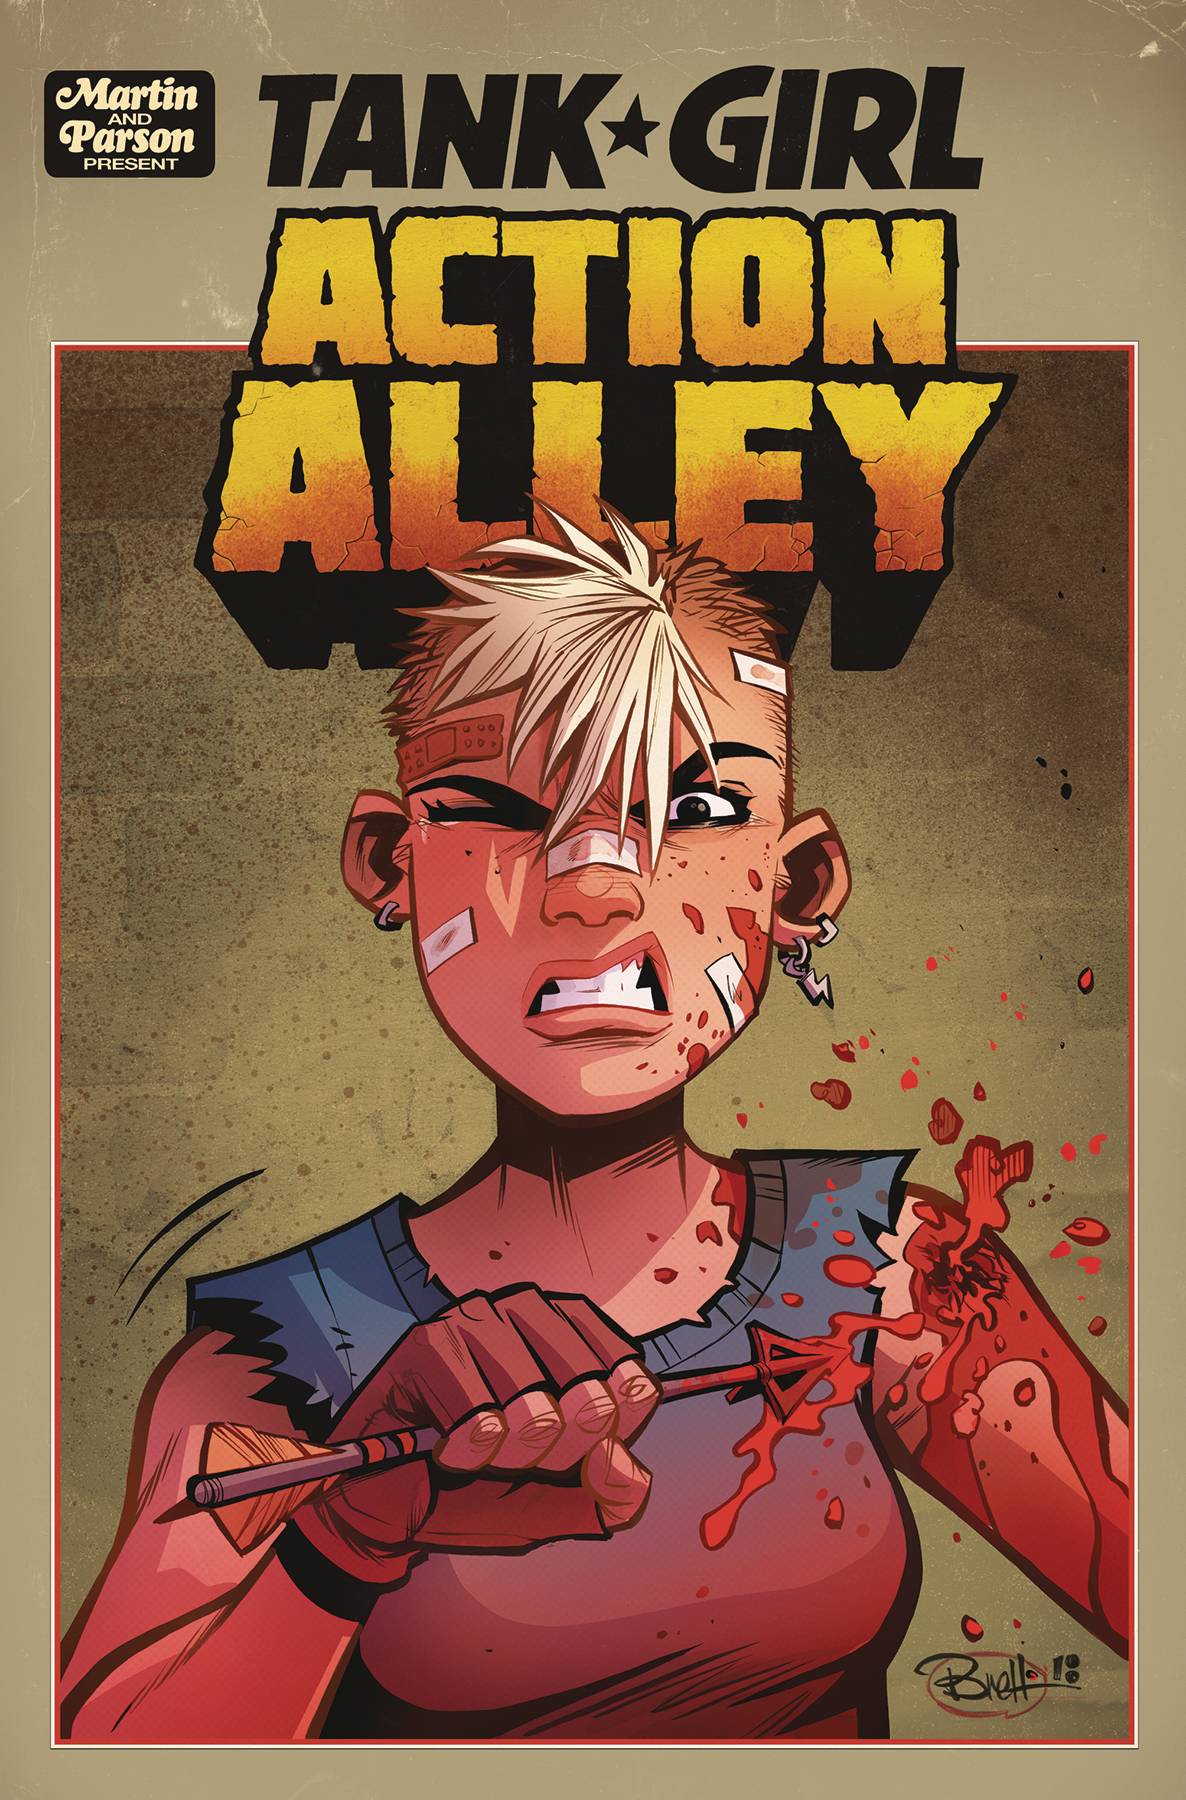 Tank Girl Action Alley #2 Cover A Parson